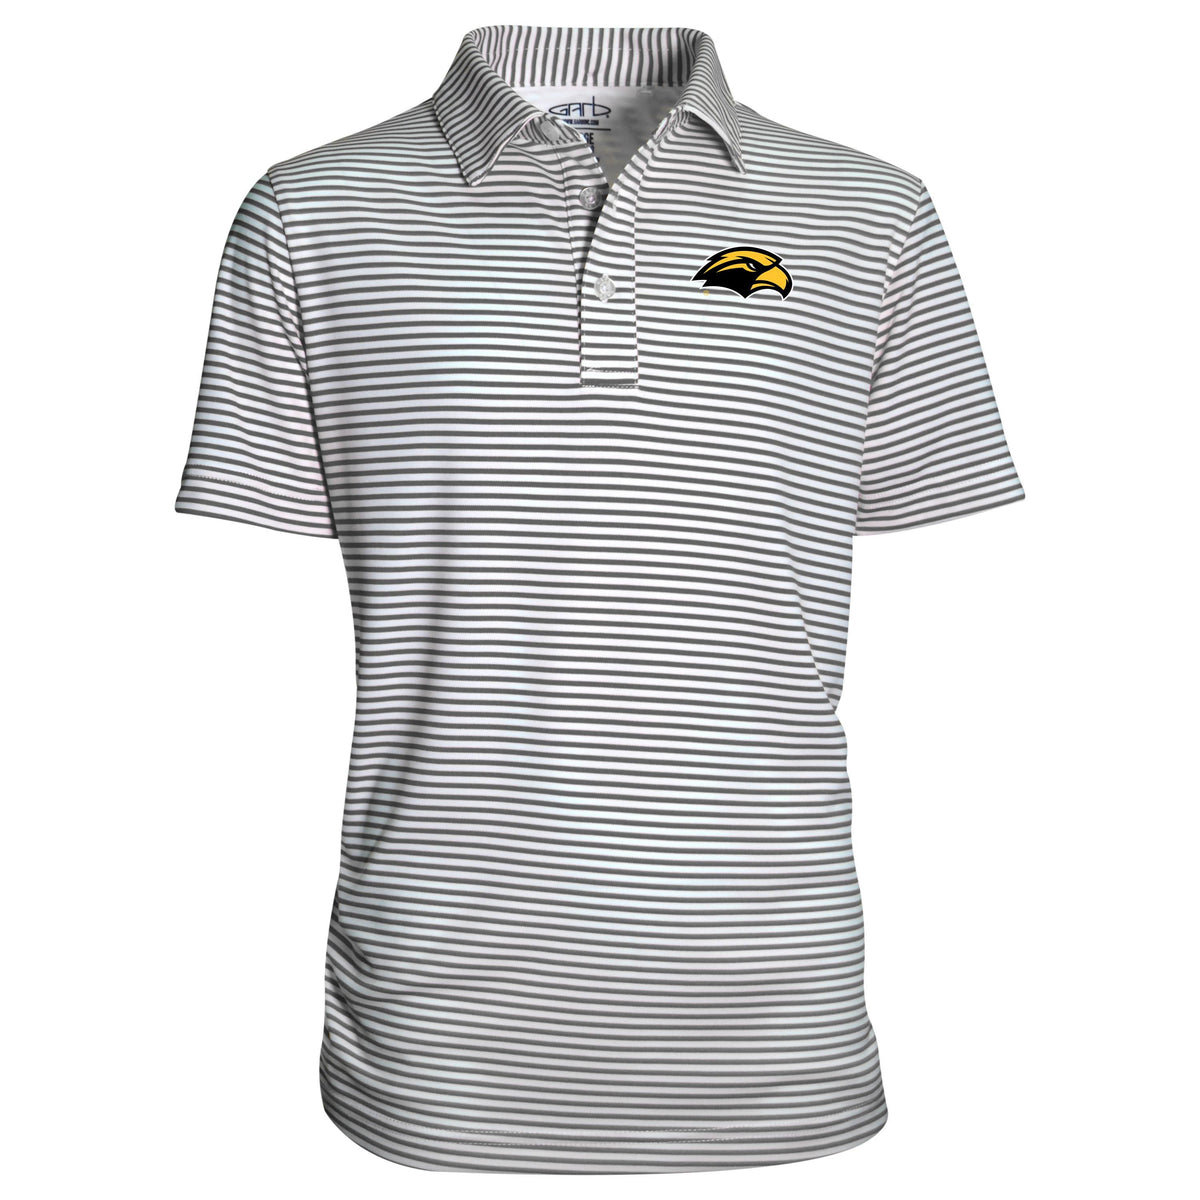 Southern Mississippi Golden Eagles Youth Boys' Polo